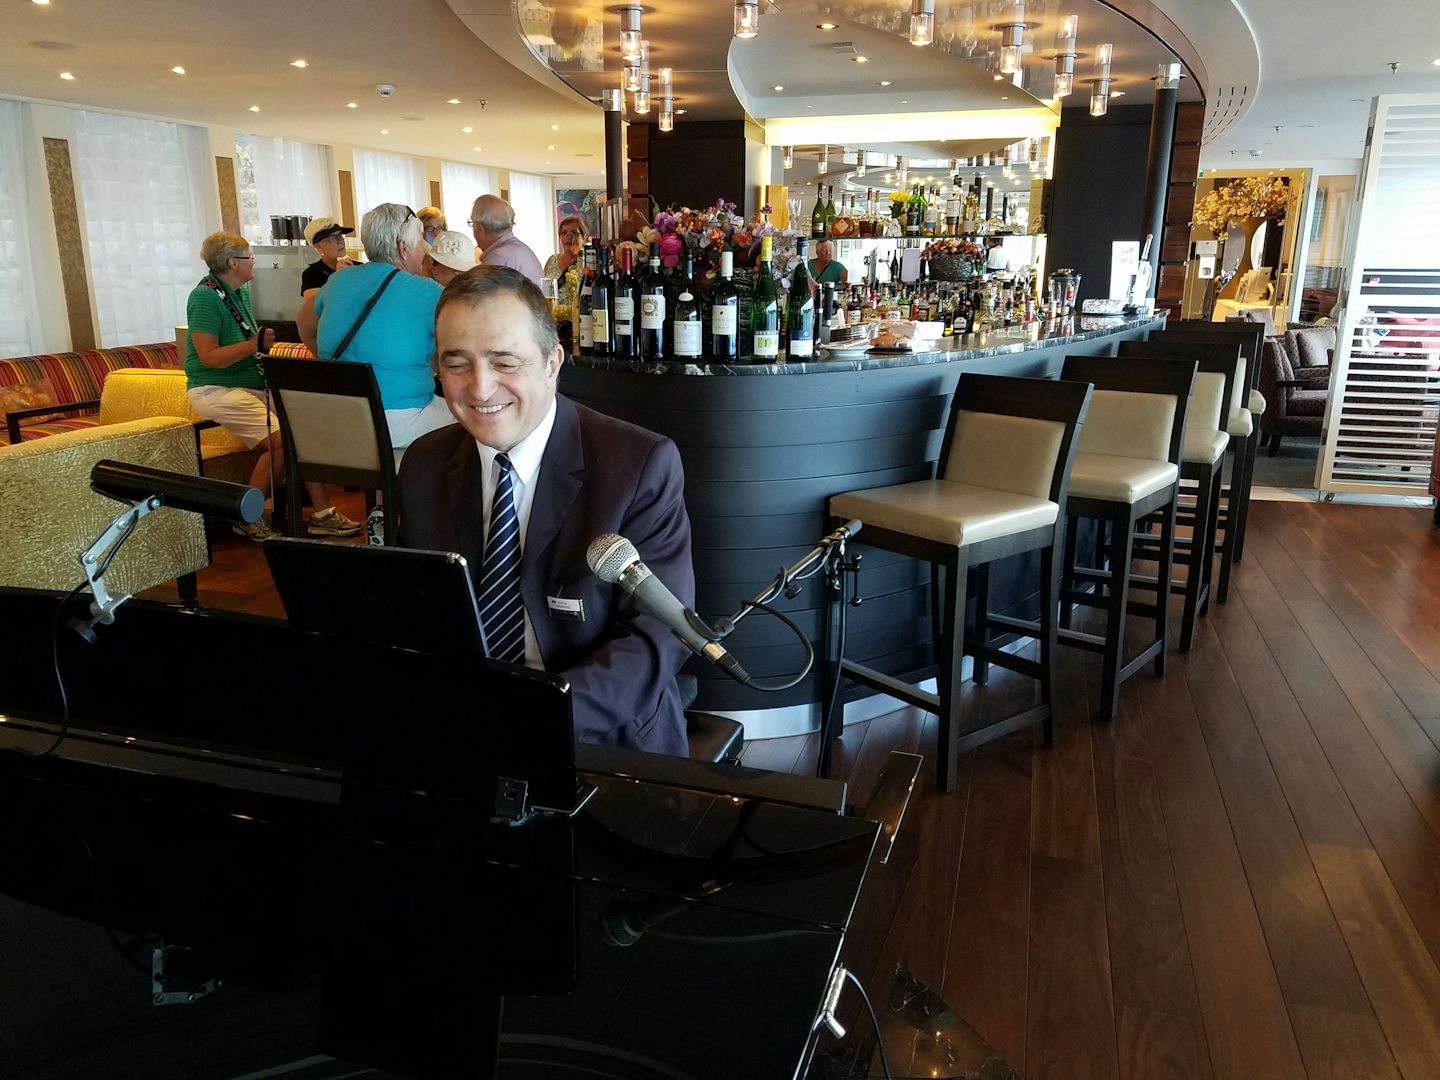 On-board pianist/singer who gave music several times during day and evening